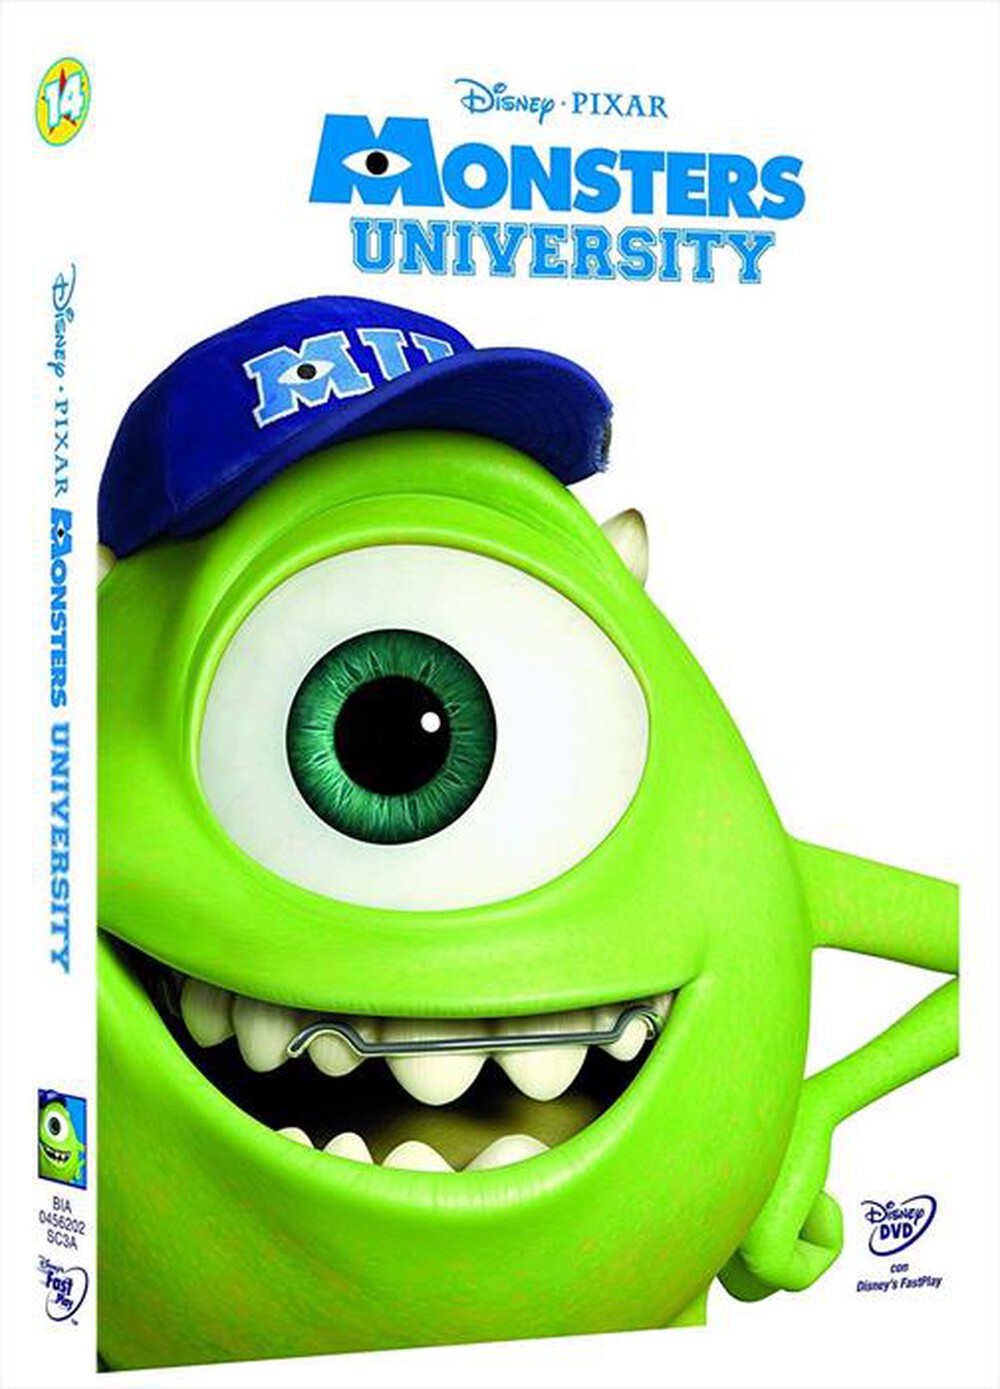 "EAGLE PICTURES - Monsters University (SE) (2 Blu-Ray)"